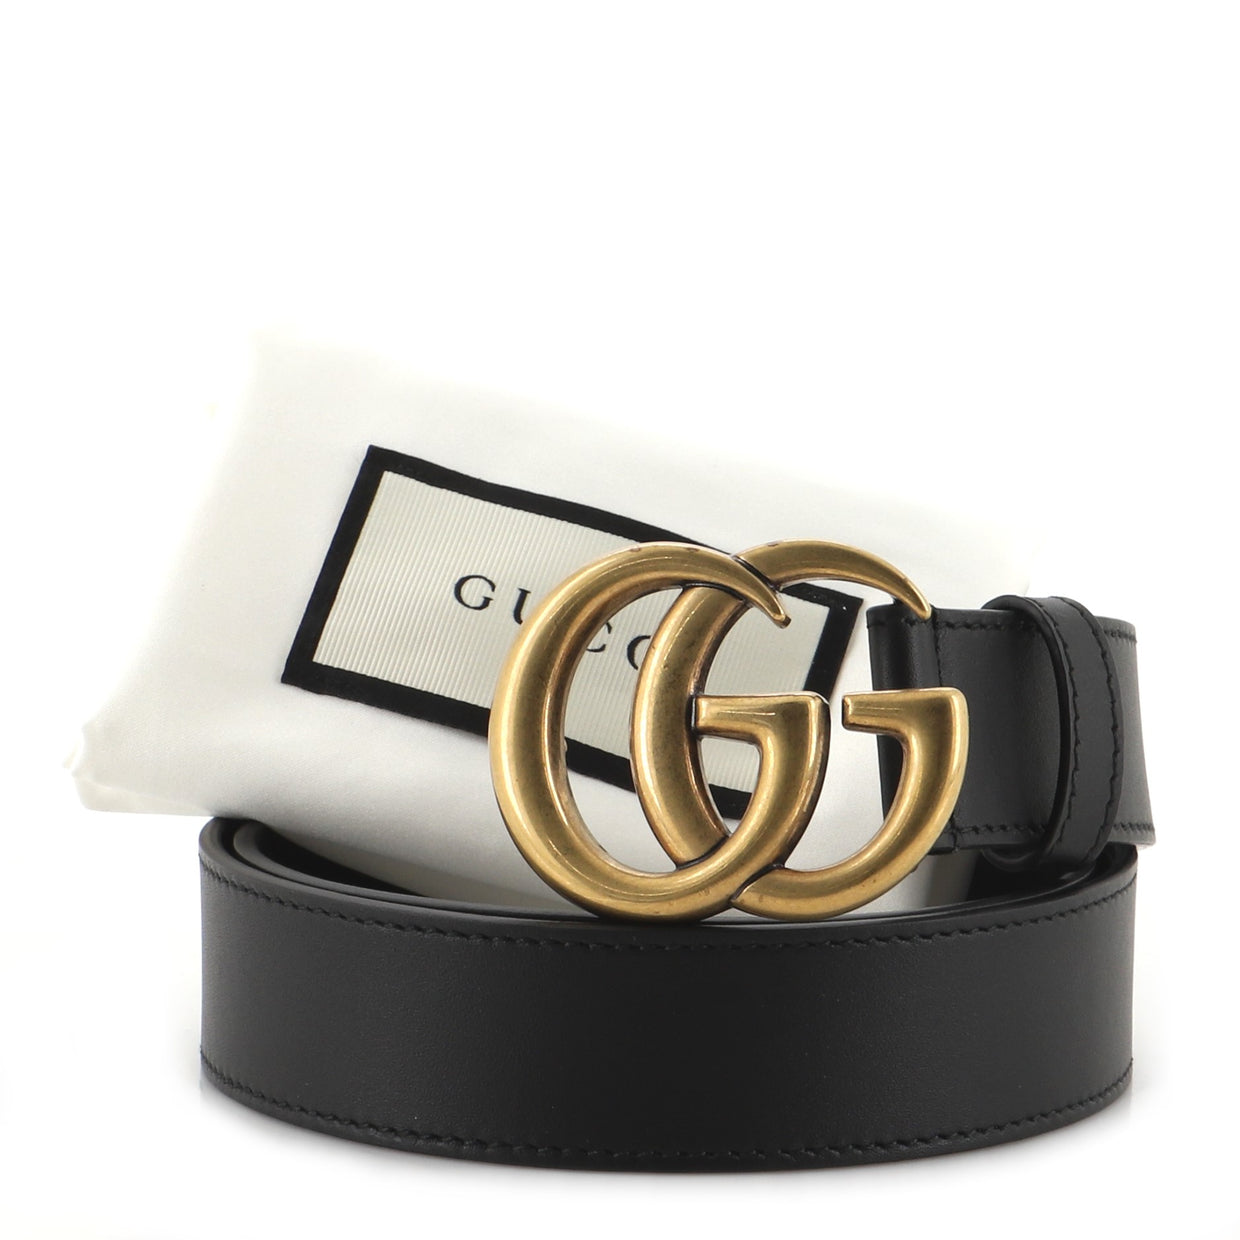 Gucci GG Marmont Belt Leather Thin Black 801933